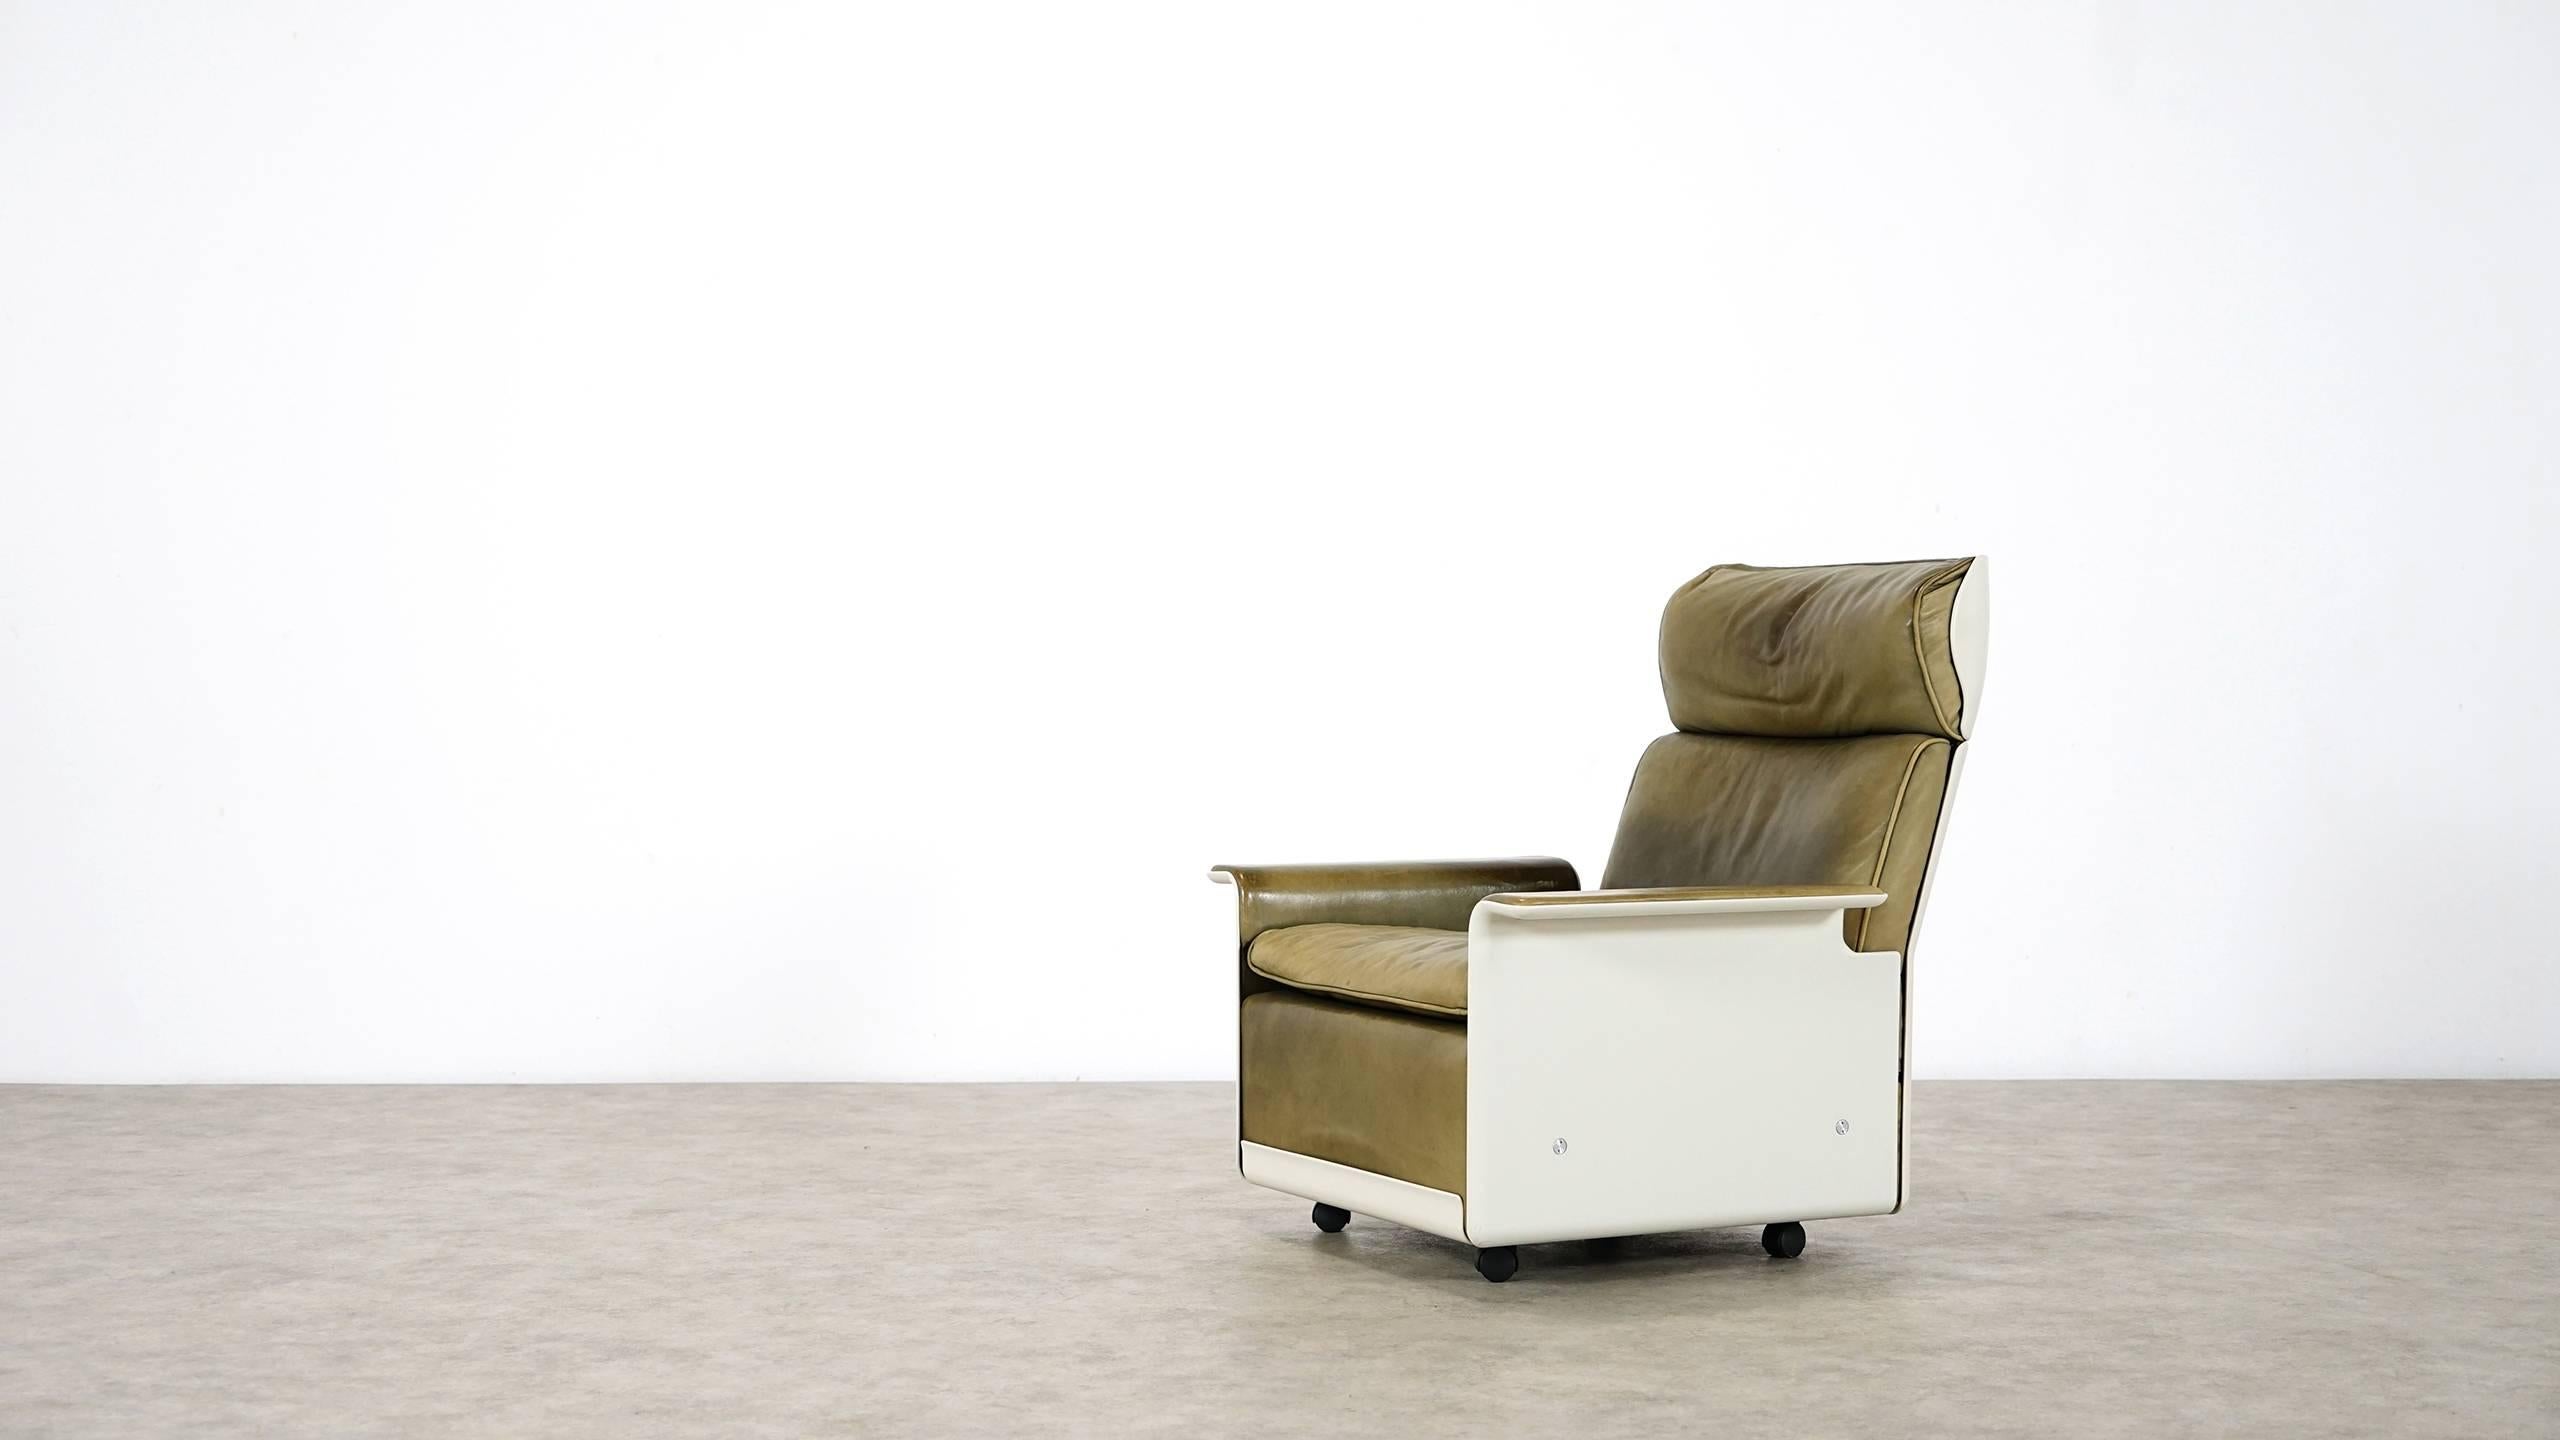 Mid-20th Century Dieter Rams, Lounge Chair and Ottoman RZ 62 by Vitsœ 620, Olivgreen Leather